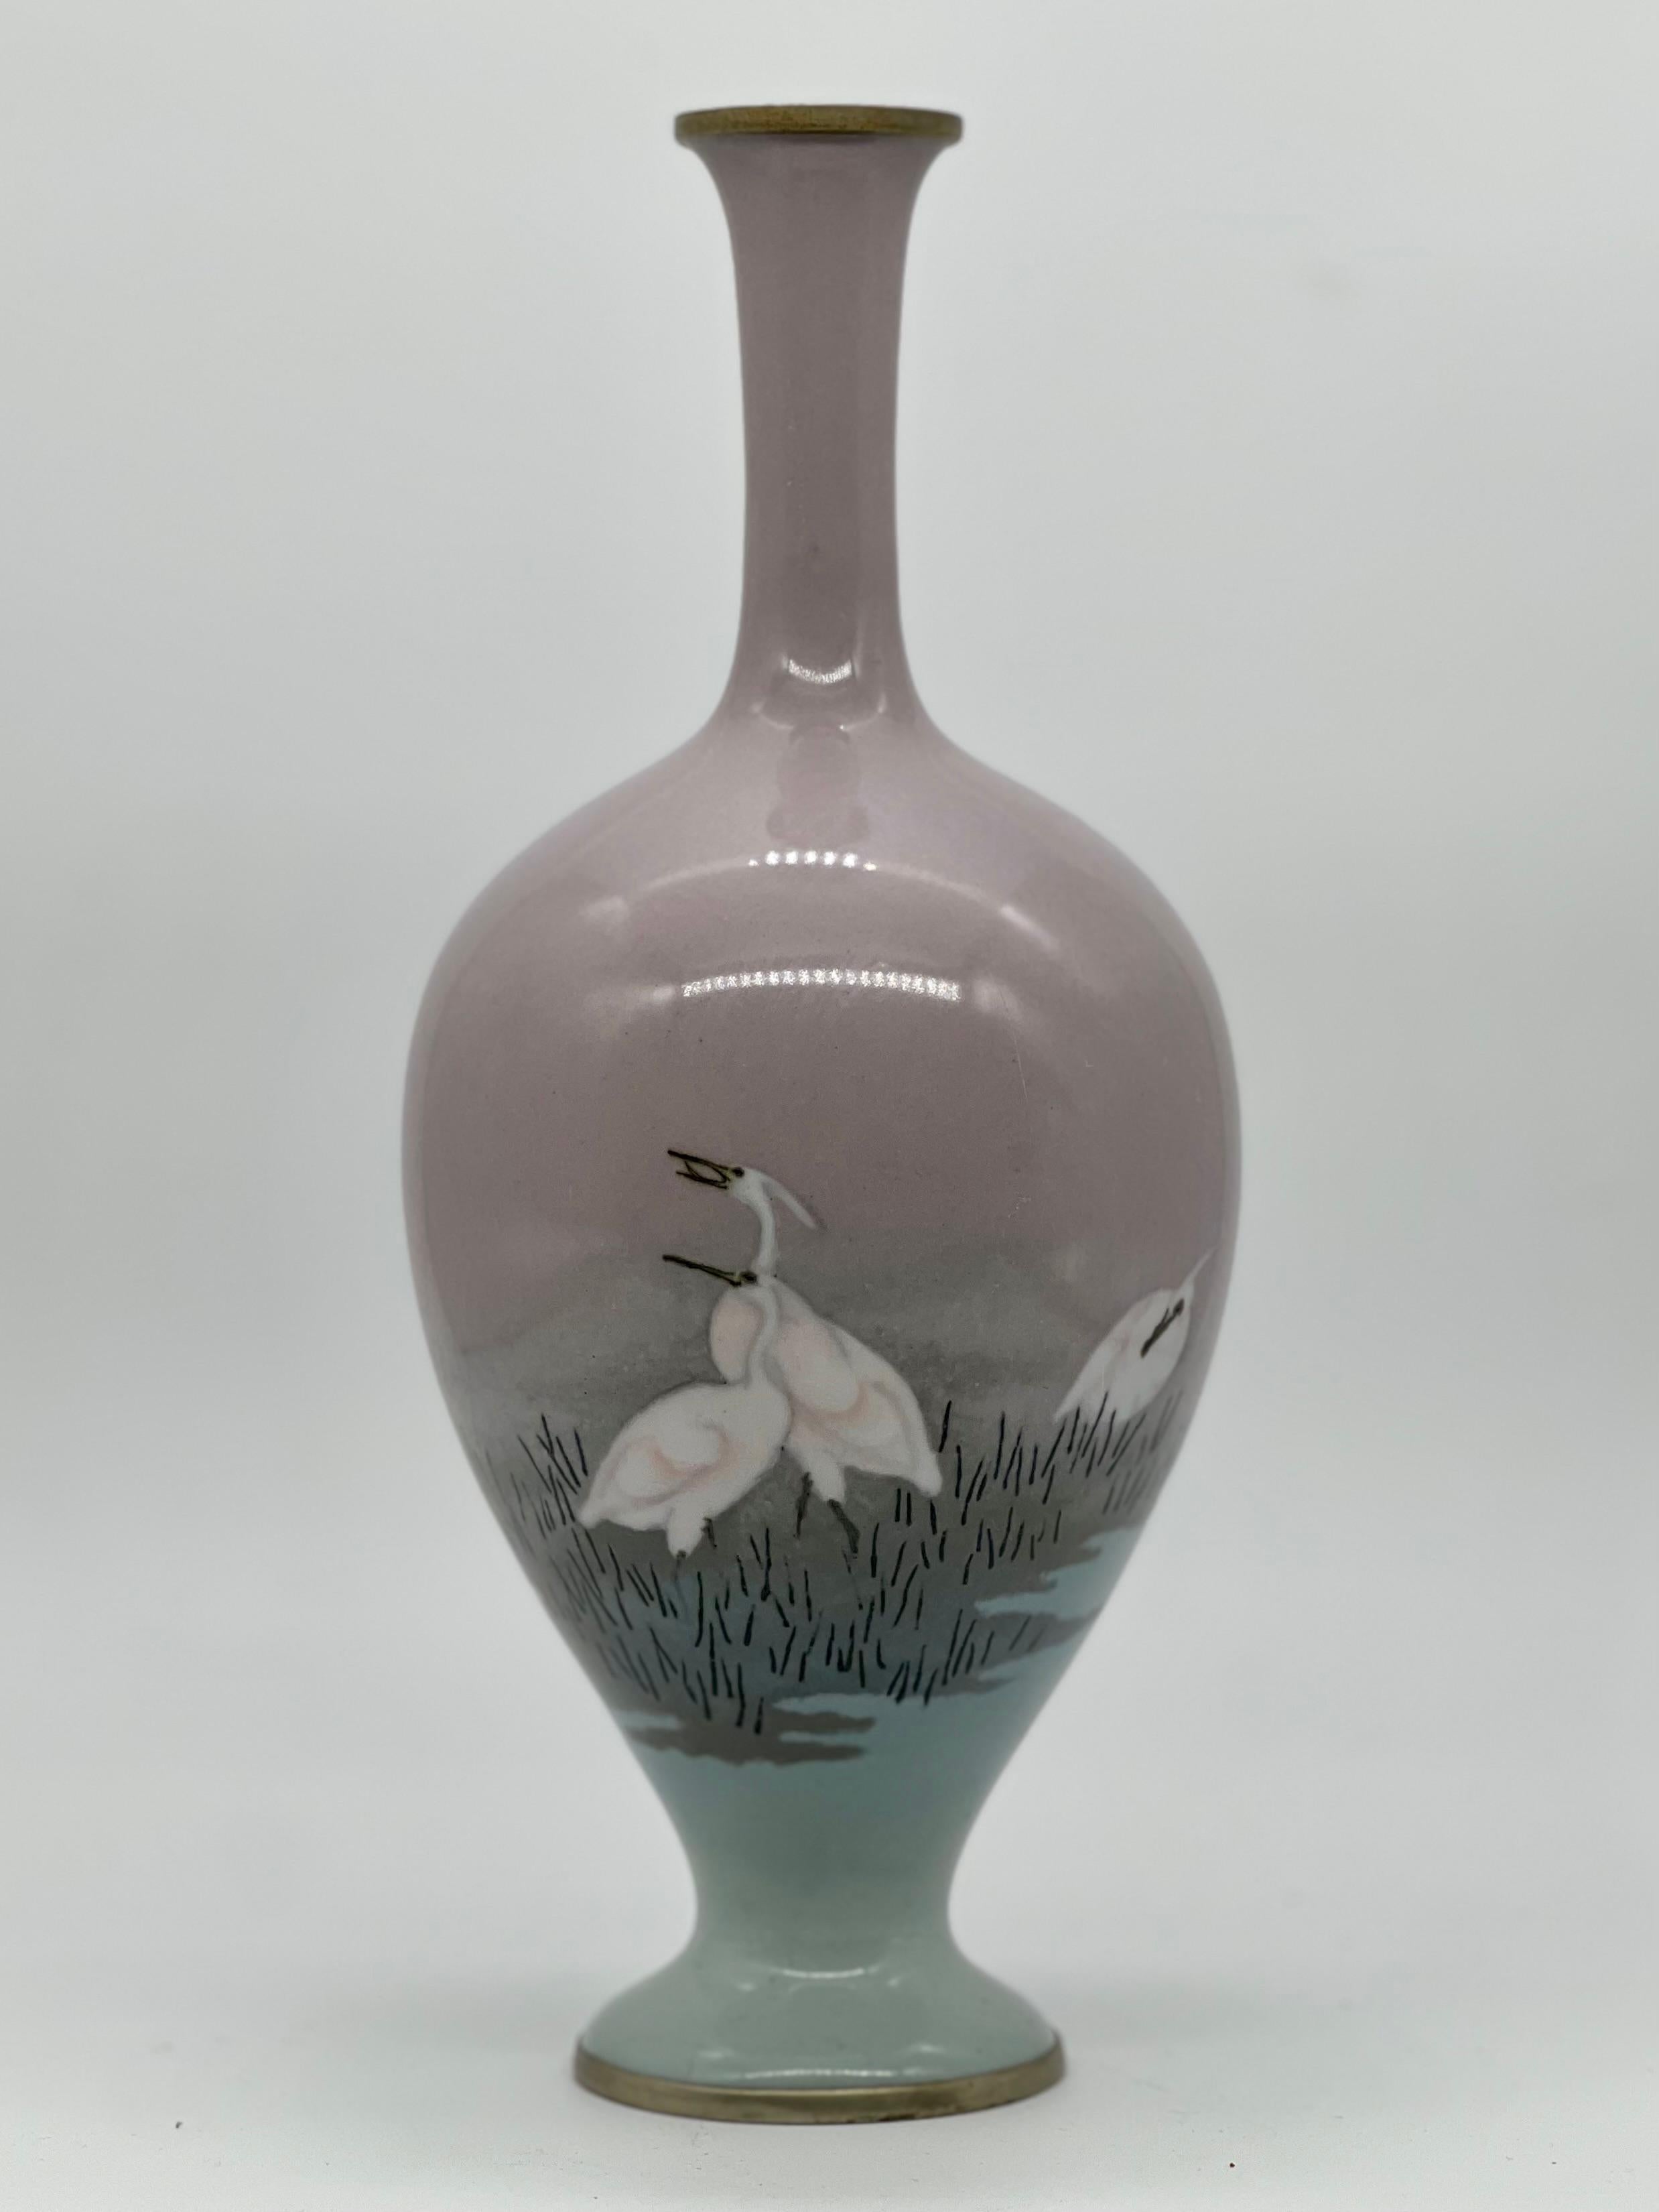 A magnificent Cloisonné-enamel and Musen Baluster vase attributed to Namikawa Sosuke.
Meiji era (1868-1912), late 19th century.

This vase features an elegant classic form with a slender neck and flared mouth above a baluster body. Decorated with